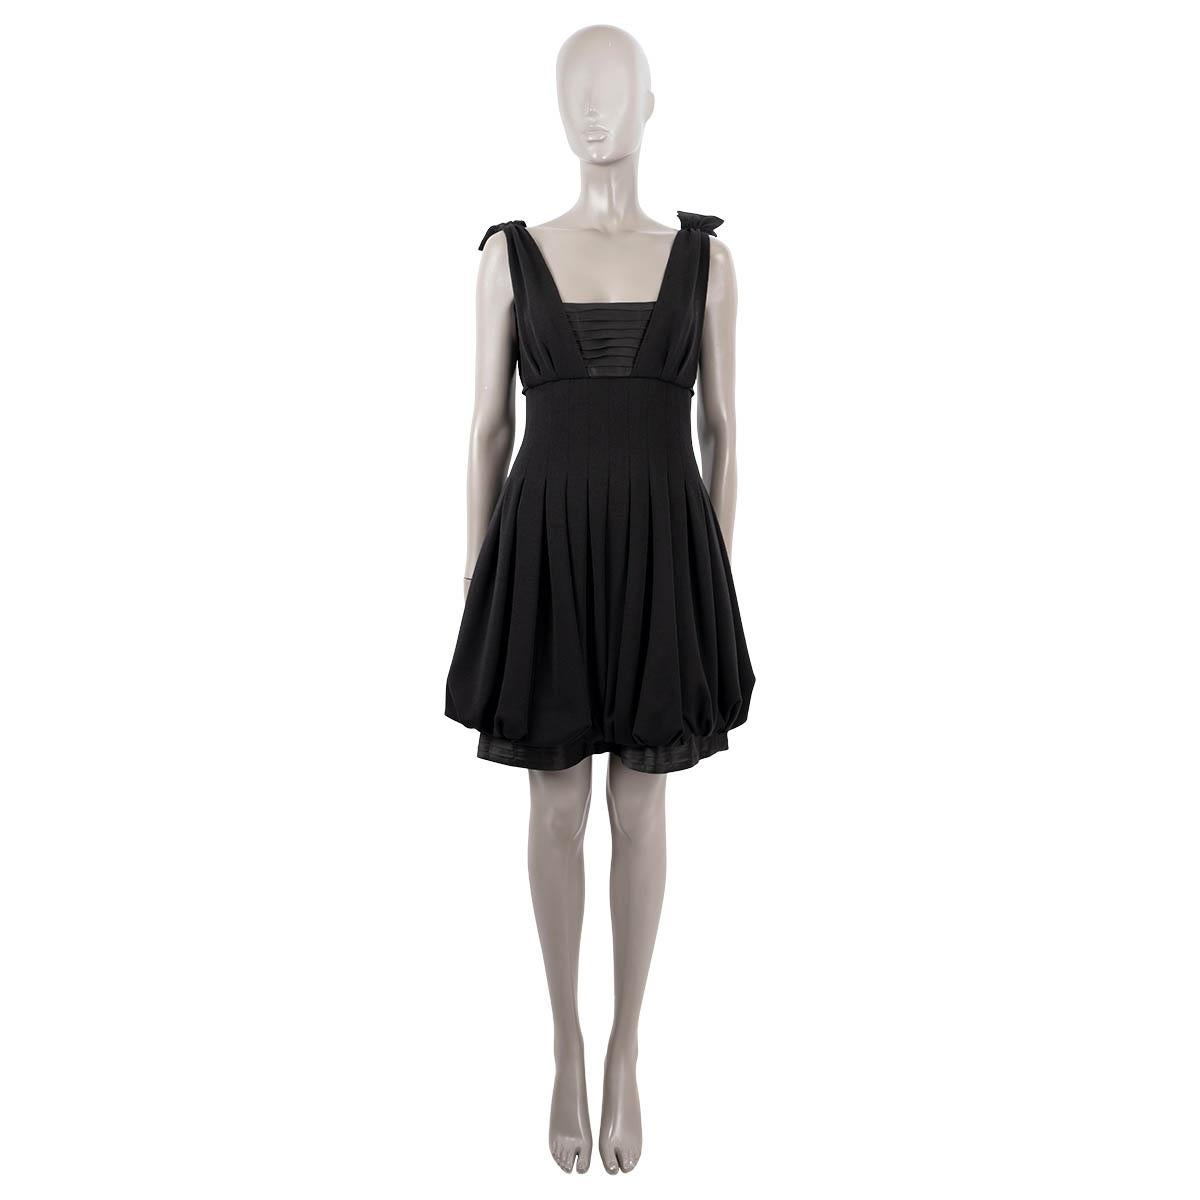 100% authentic Chanel sleeveless knee-length cocktail dress in back wool (100%) with top and bottom part in black silk (100%). Opens with four rhinestone buttons and a hidden zipper on the back. Lined in silk. Has been worn and is in excellent